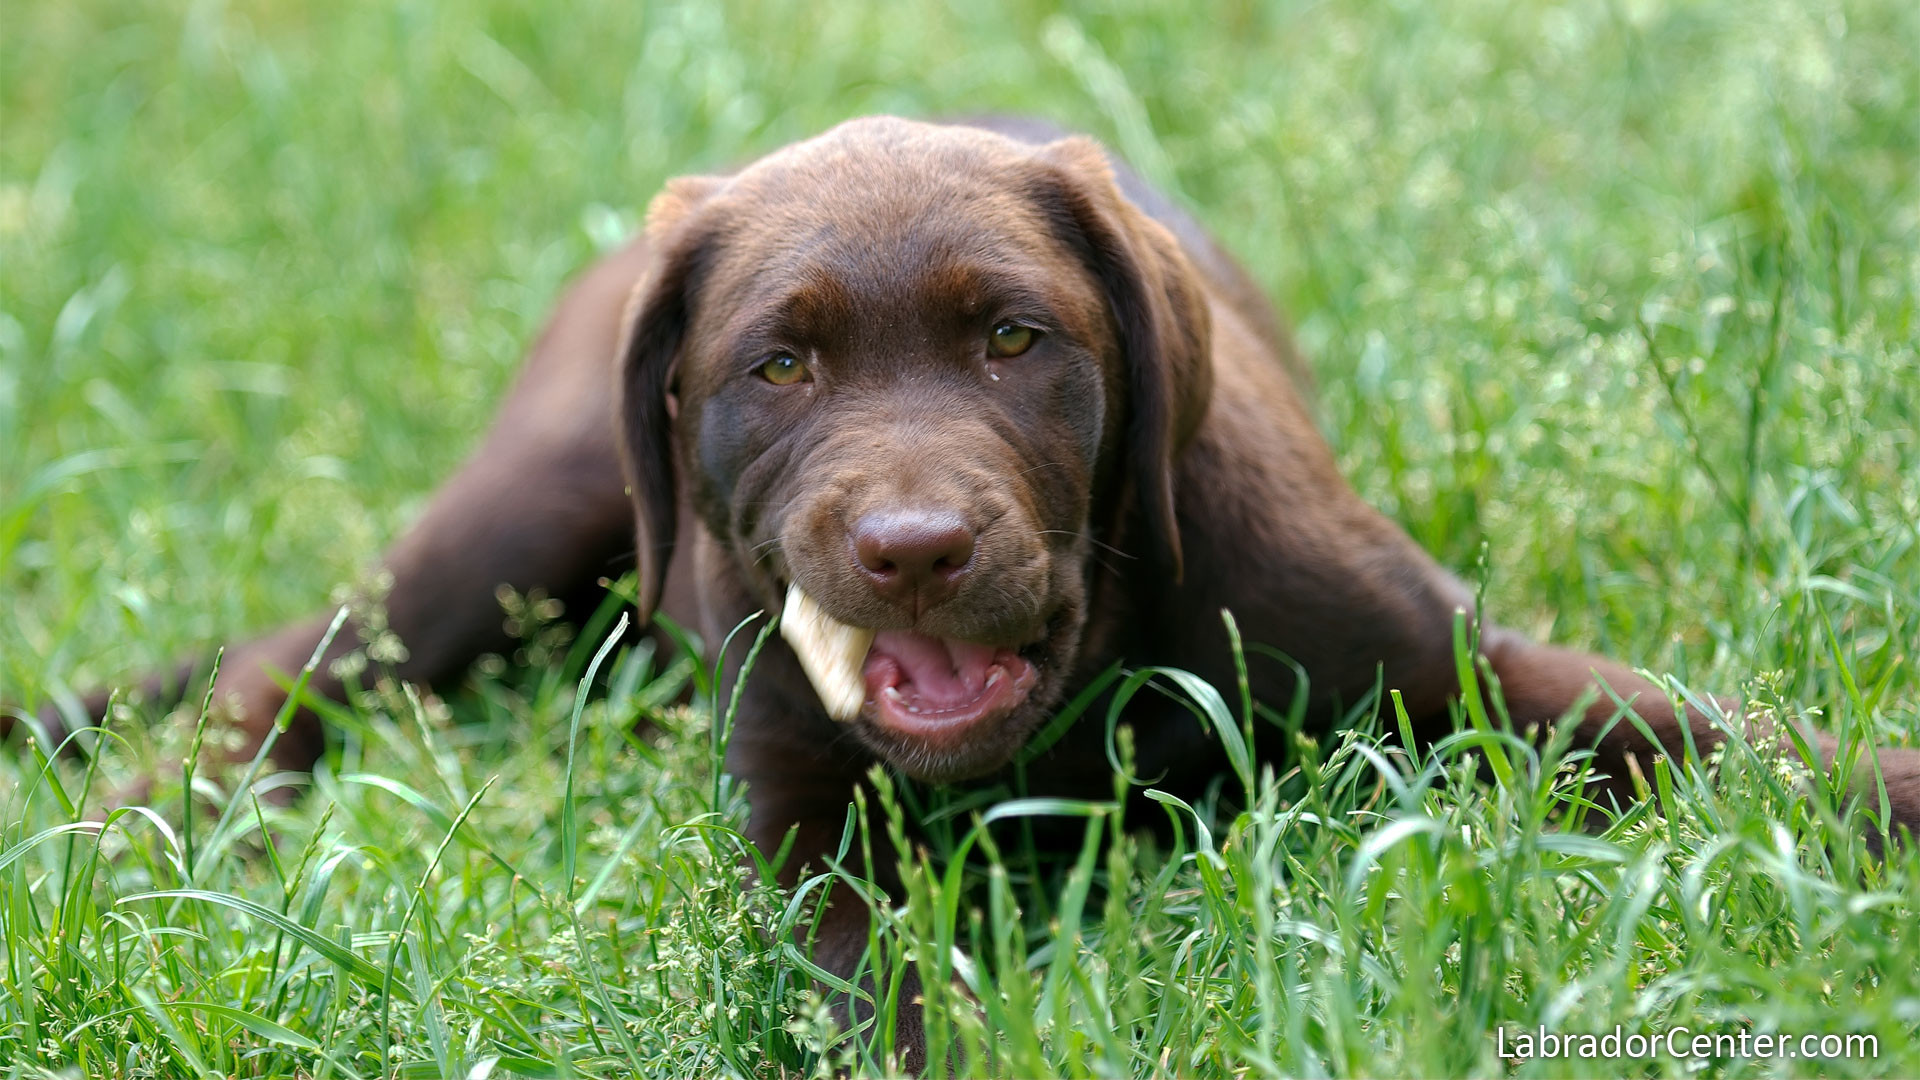 1920x1080 Chocolate(Brown) Labrador Pup in the Grass